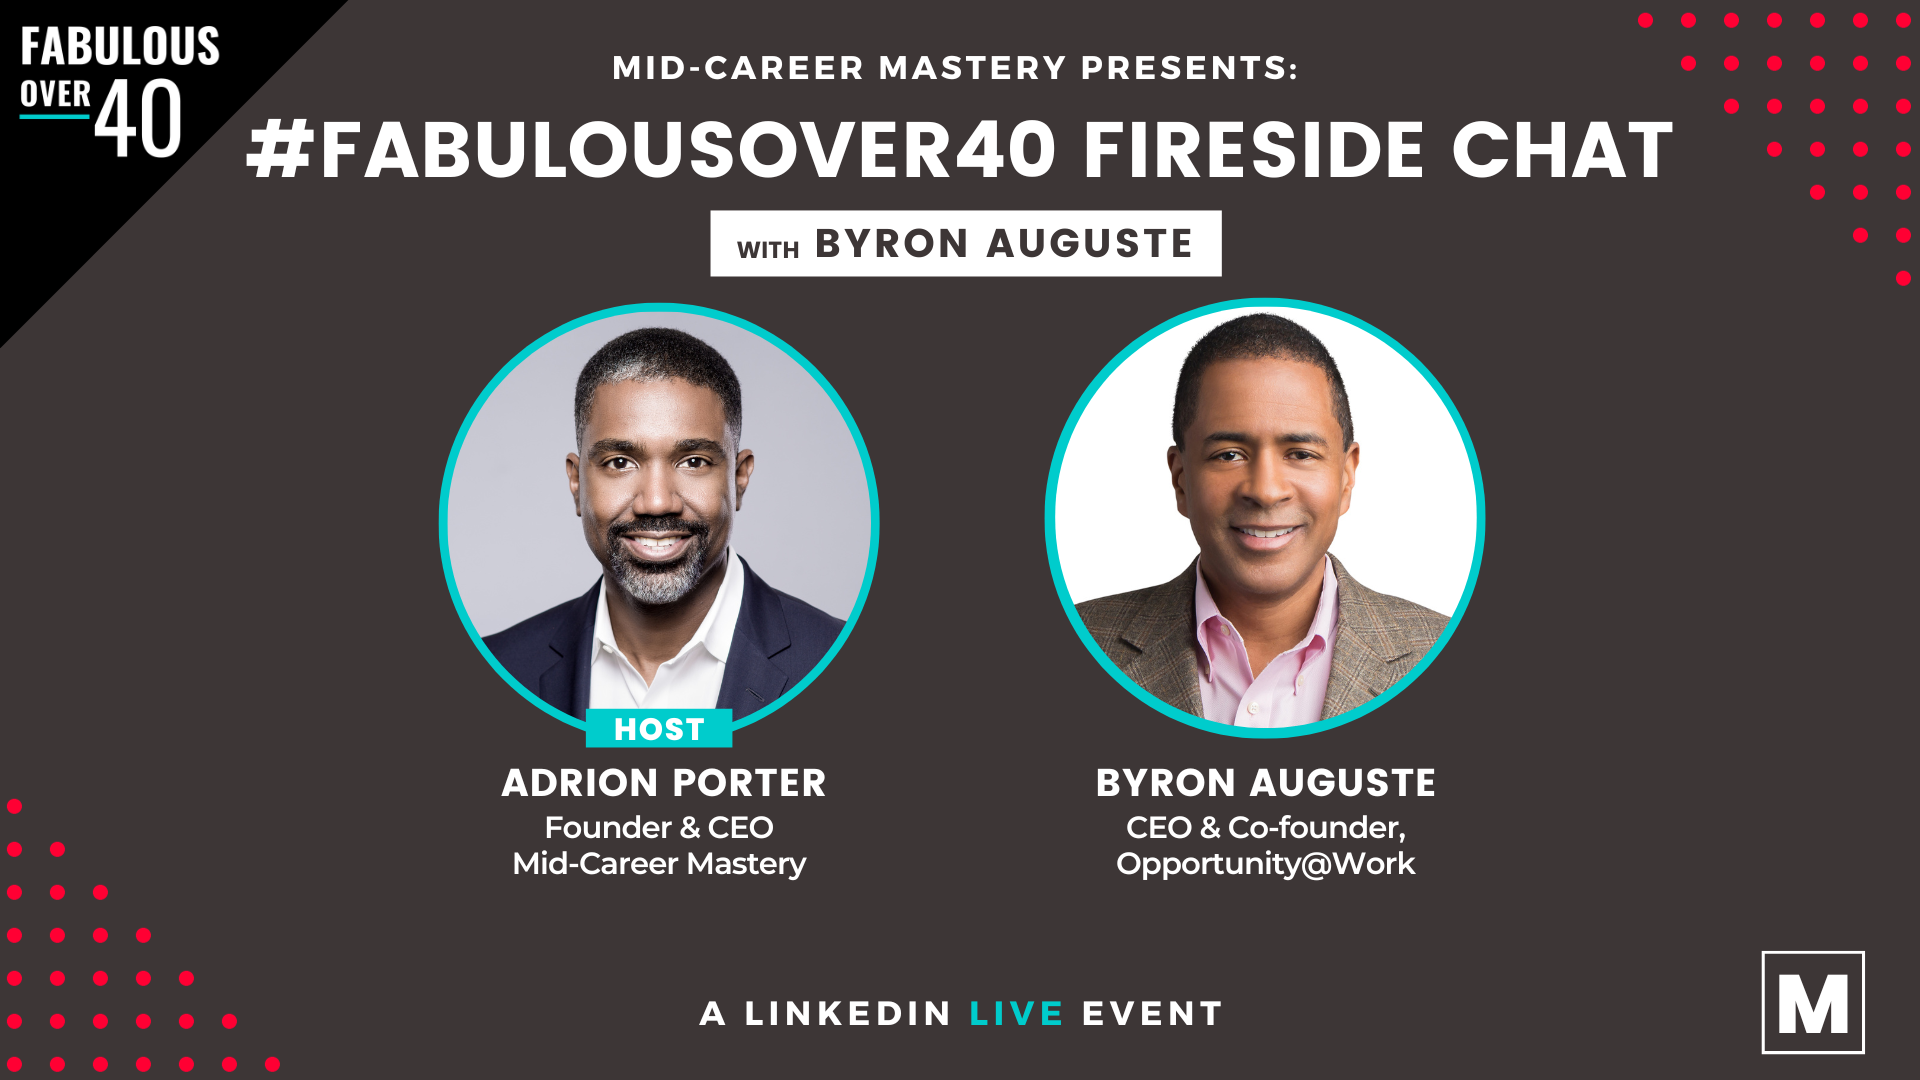 Fabulous Over 40 Fireside Chat with Byron Auguste, CEO of Opportunity@Work